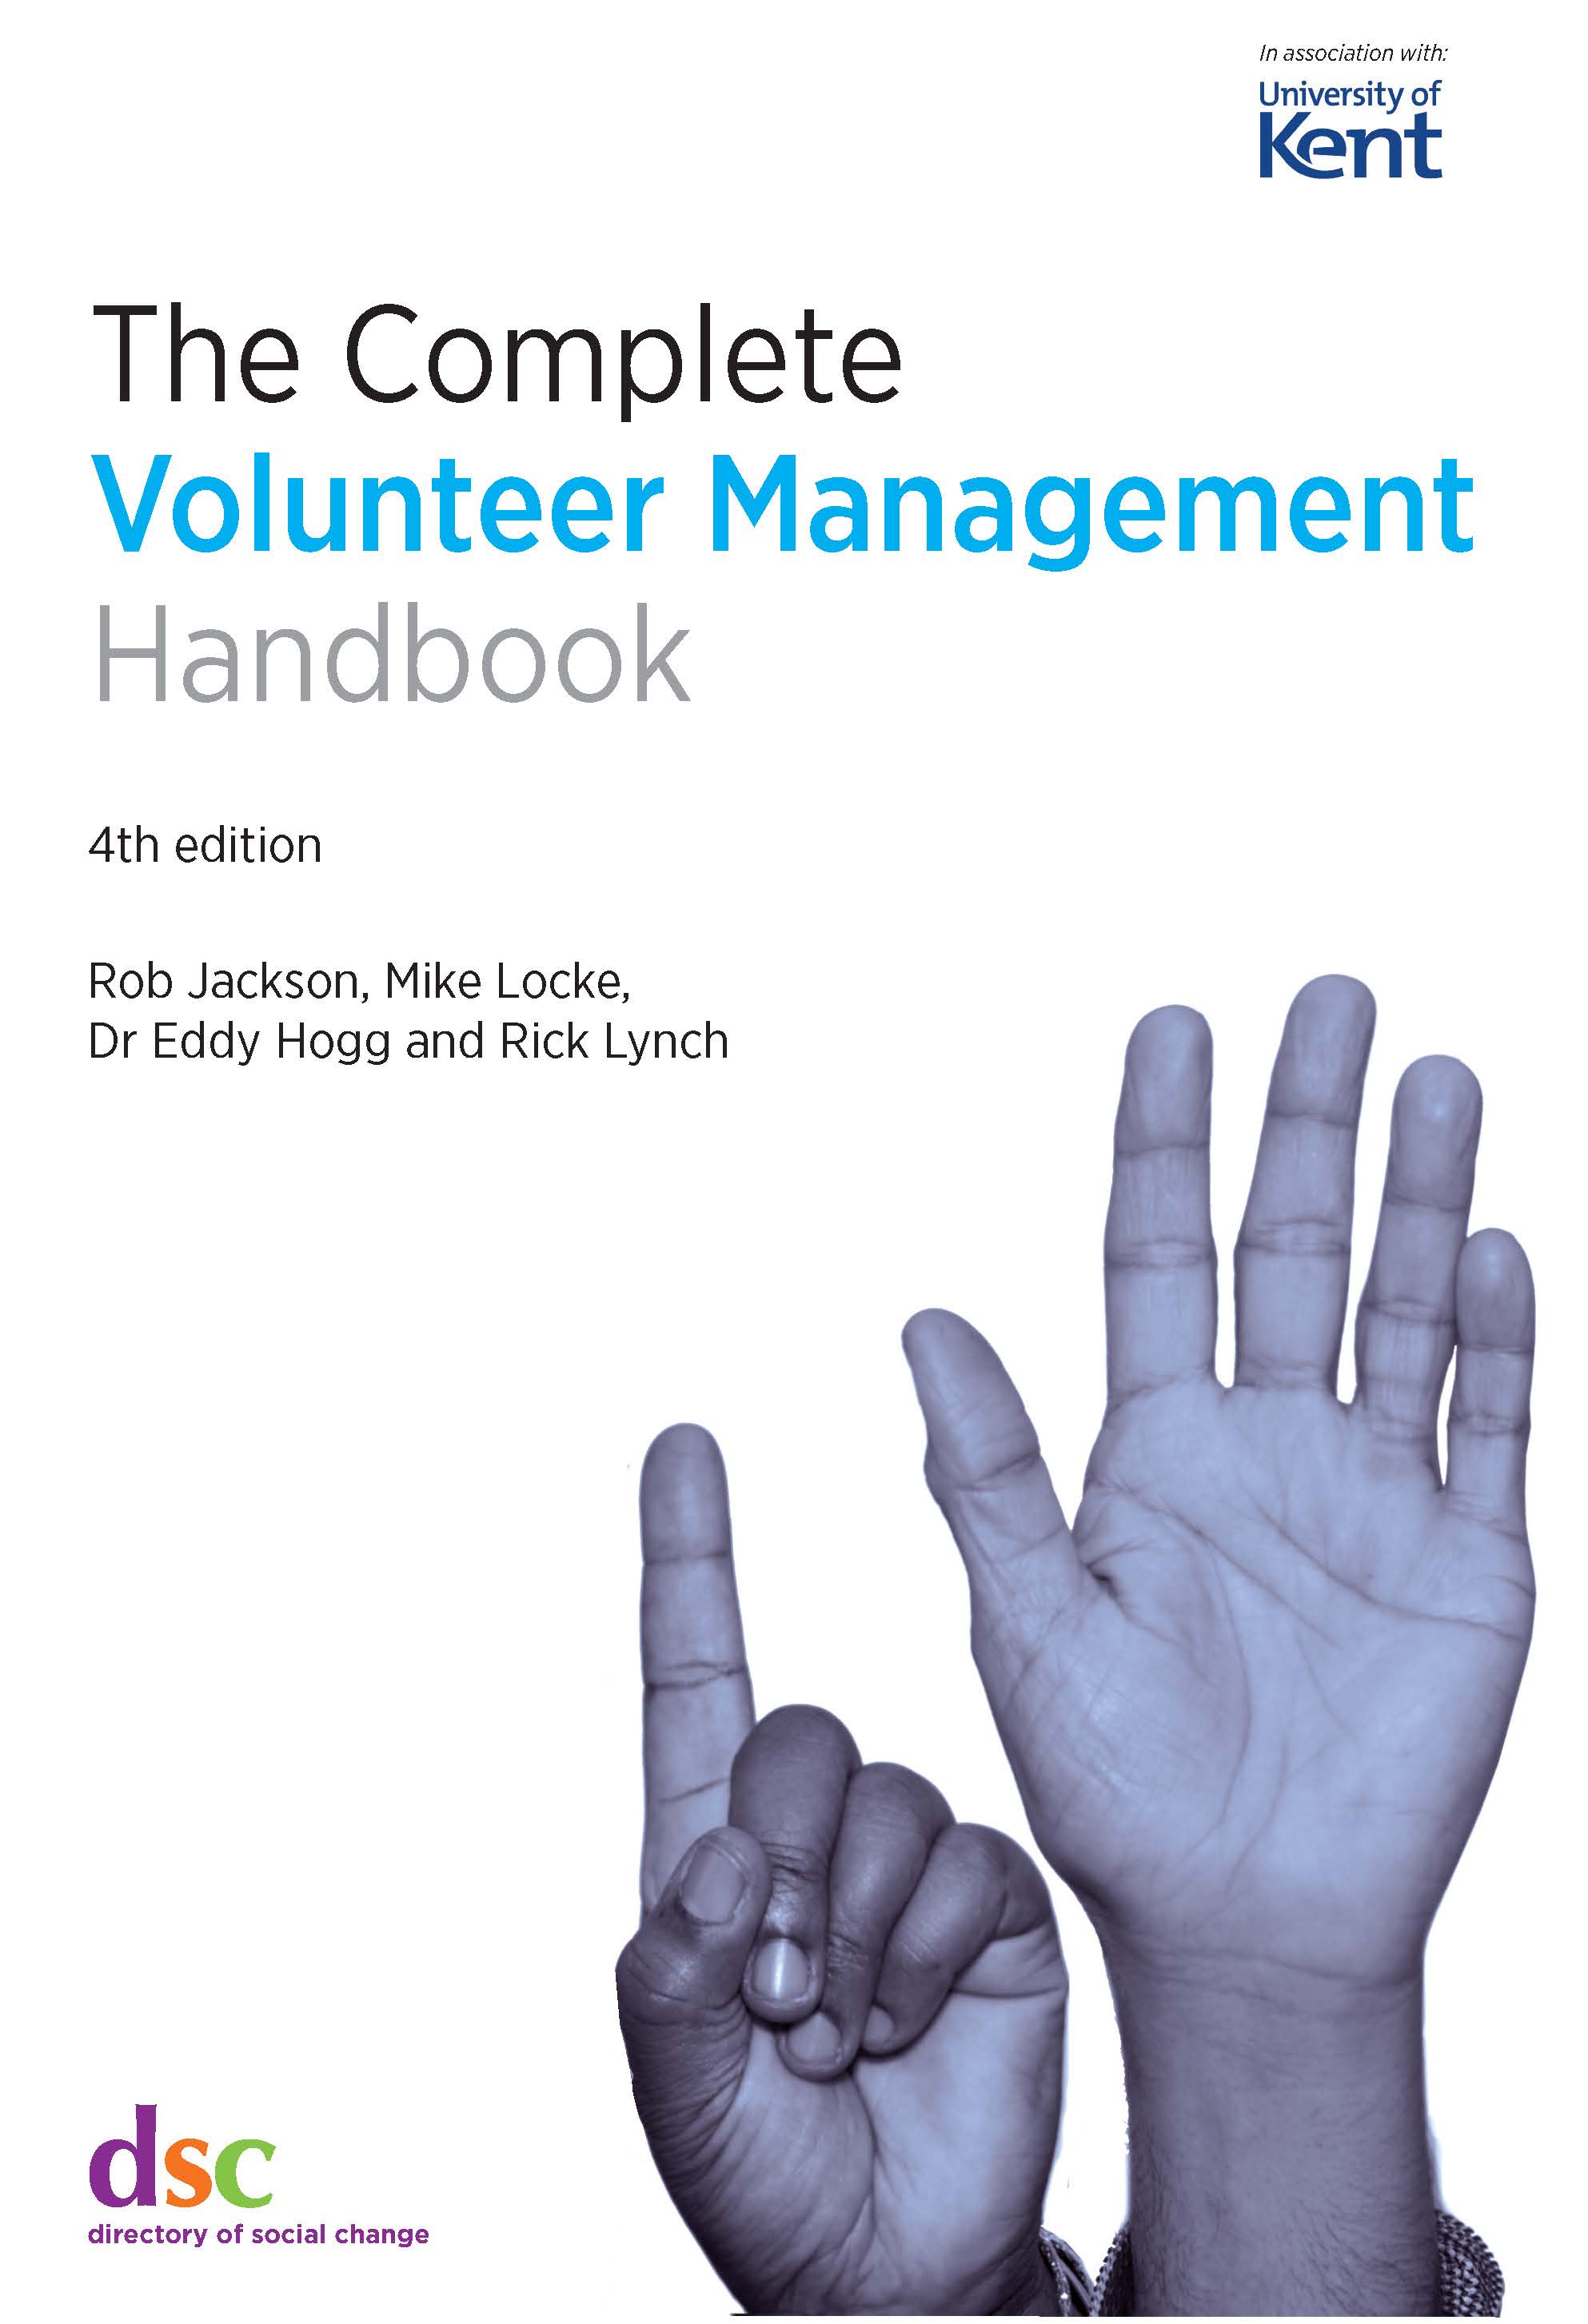 Front cover of the 2019 edition of the Complete Volunteer Management Handbook